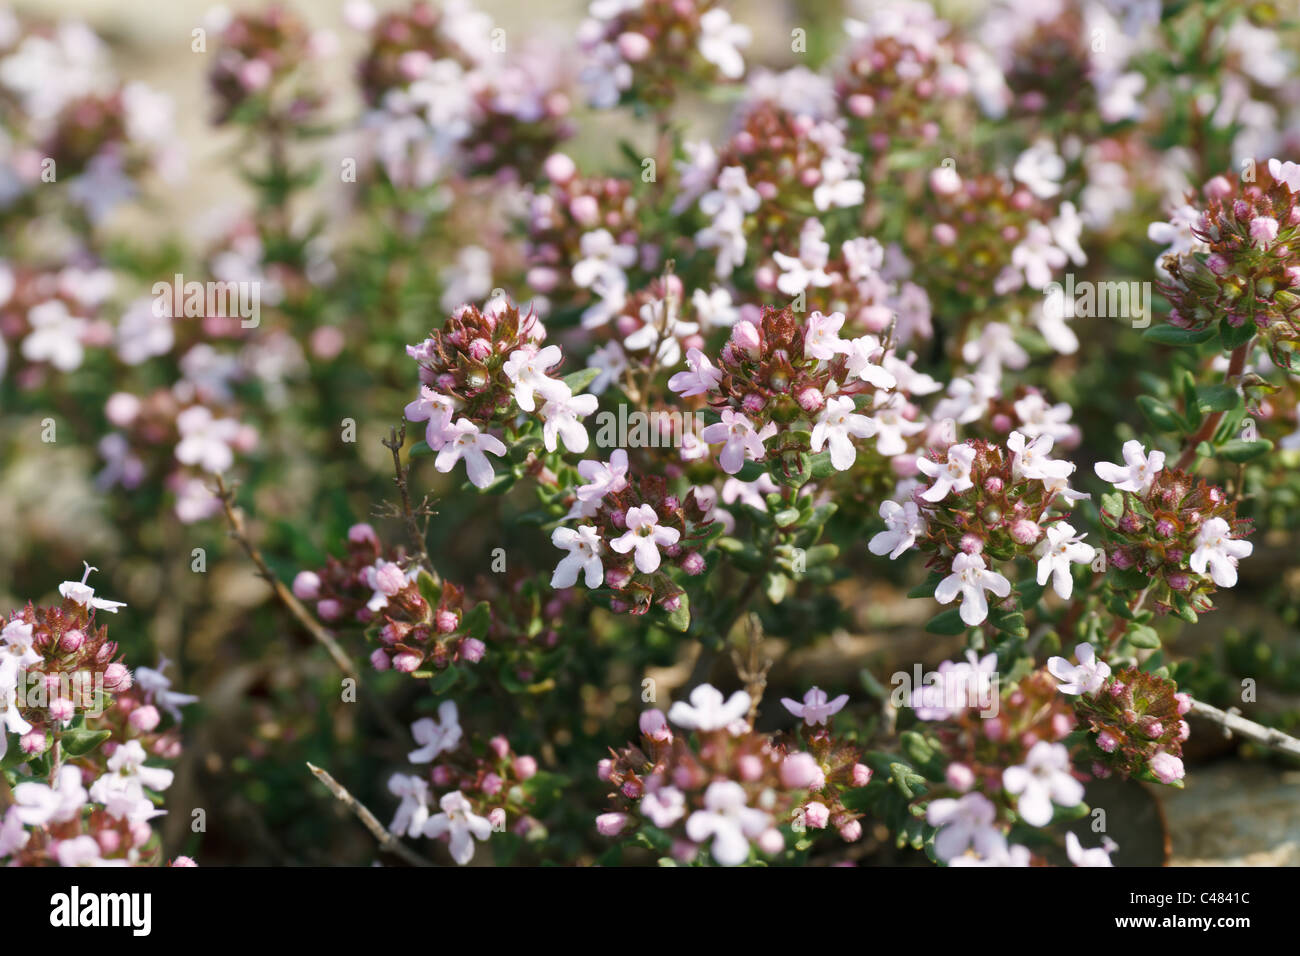 detail of thyme plant with characteristic small flowers Stock Photo